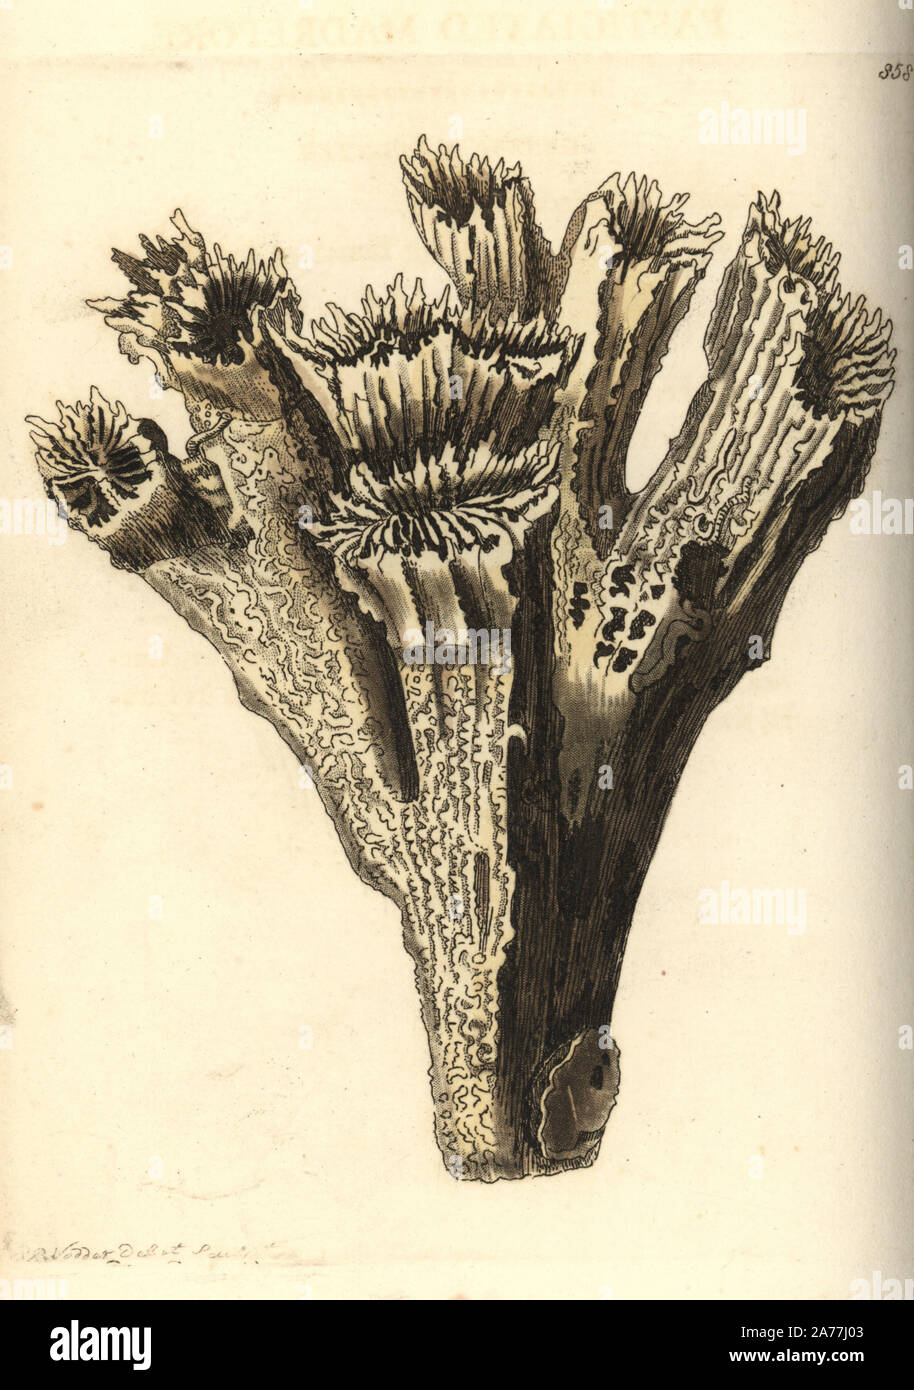 Smooth flower coral, Eusmilia fastigiata (Fastigiated madrepore, Madrepora fastigiata). Illustration drawn and engraved by Richard Polydore Nodder. Handcoloured copperplate engraving from George Shaw and Frederick Nodder's The Naturalist's Miscellany, London, 1806. Stock Photo